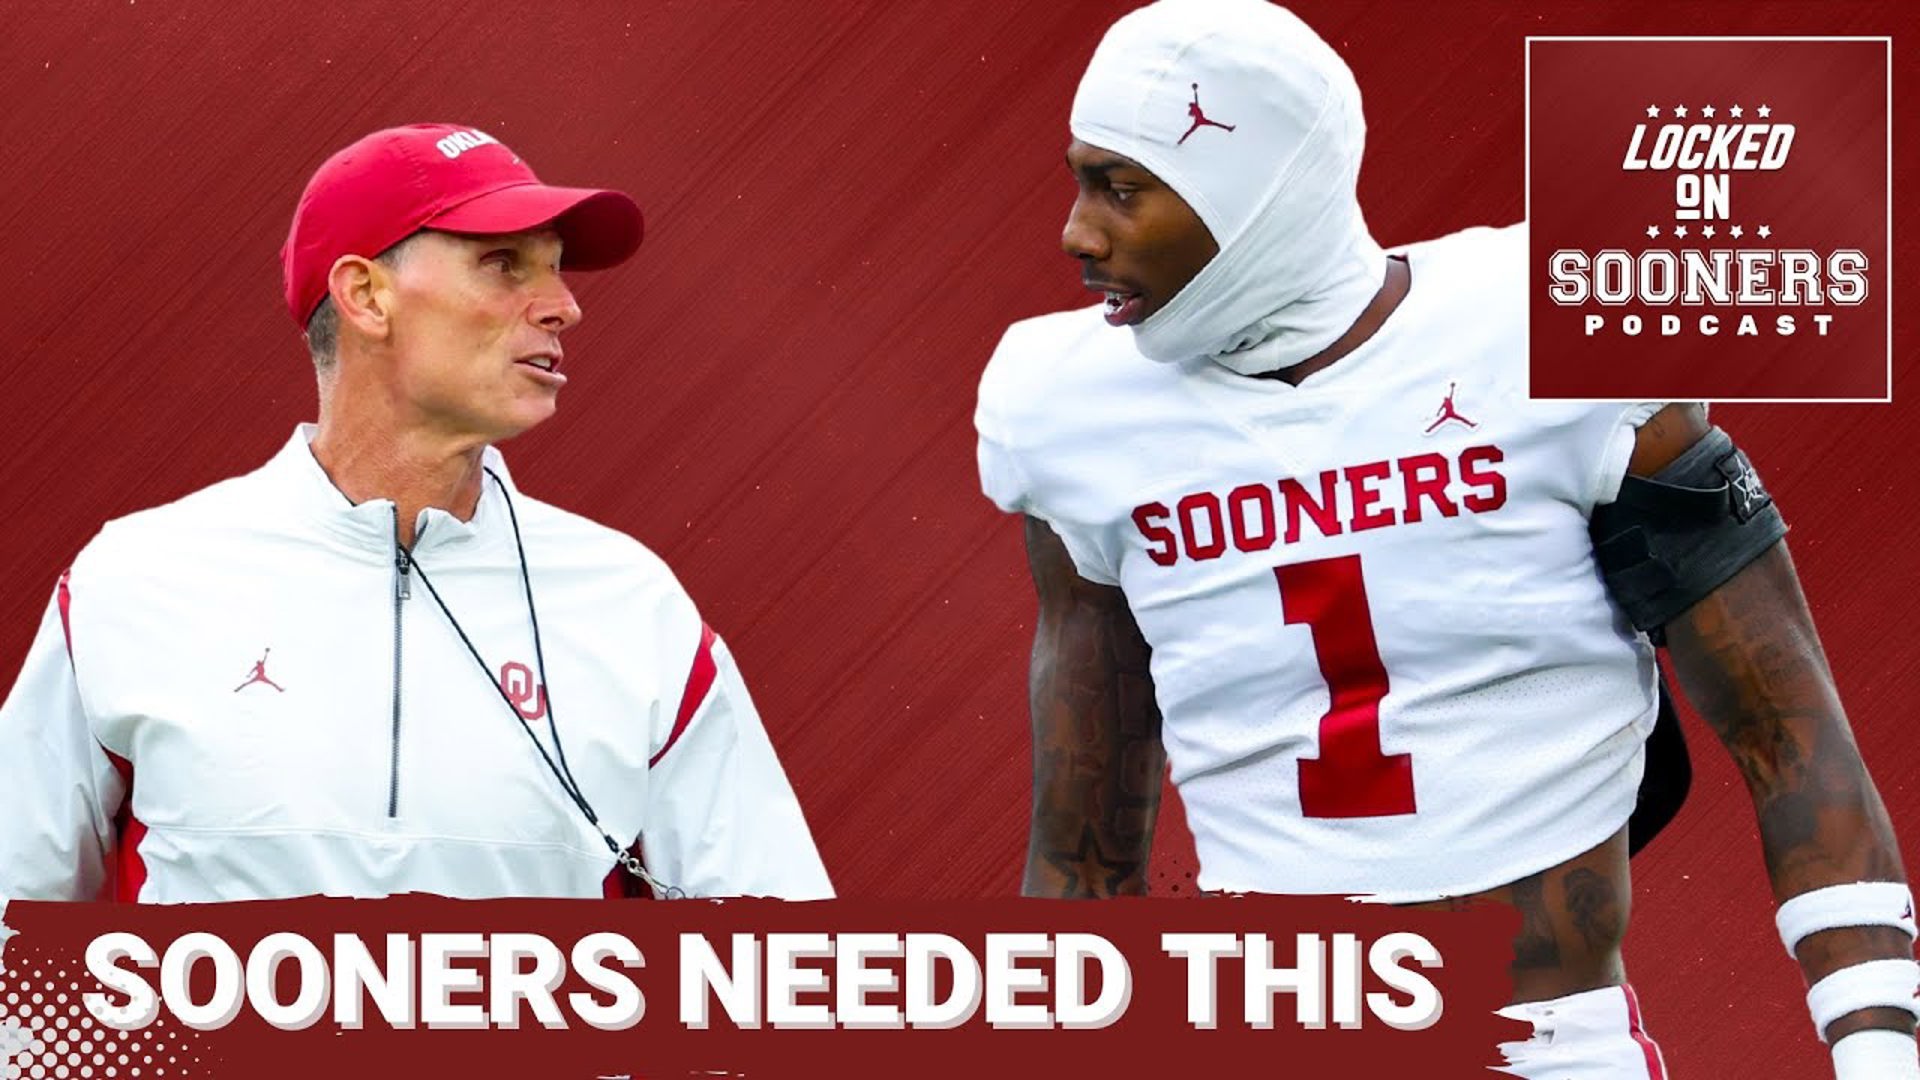 The Oklahoma Sooners are attempting to get ahead of the Salary Cap era coming to college football by collaborating with former Philadelphia Eagles front office execs